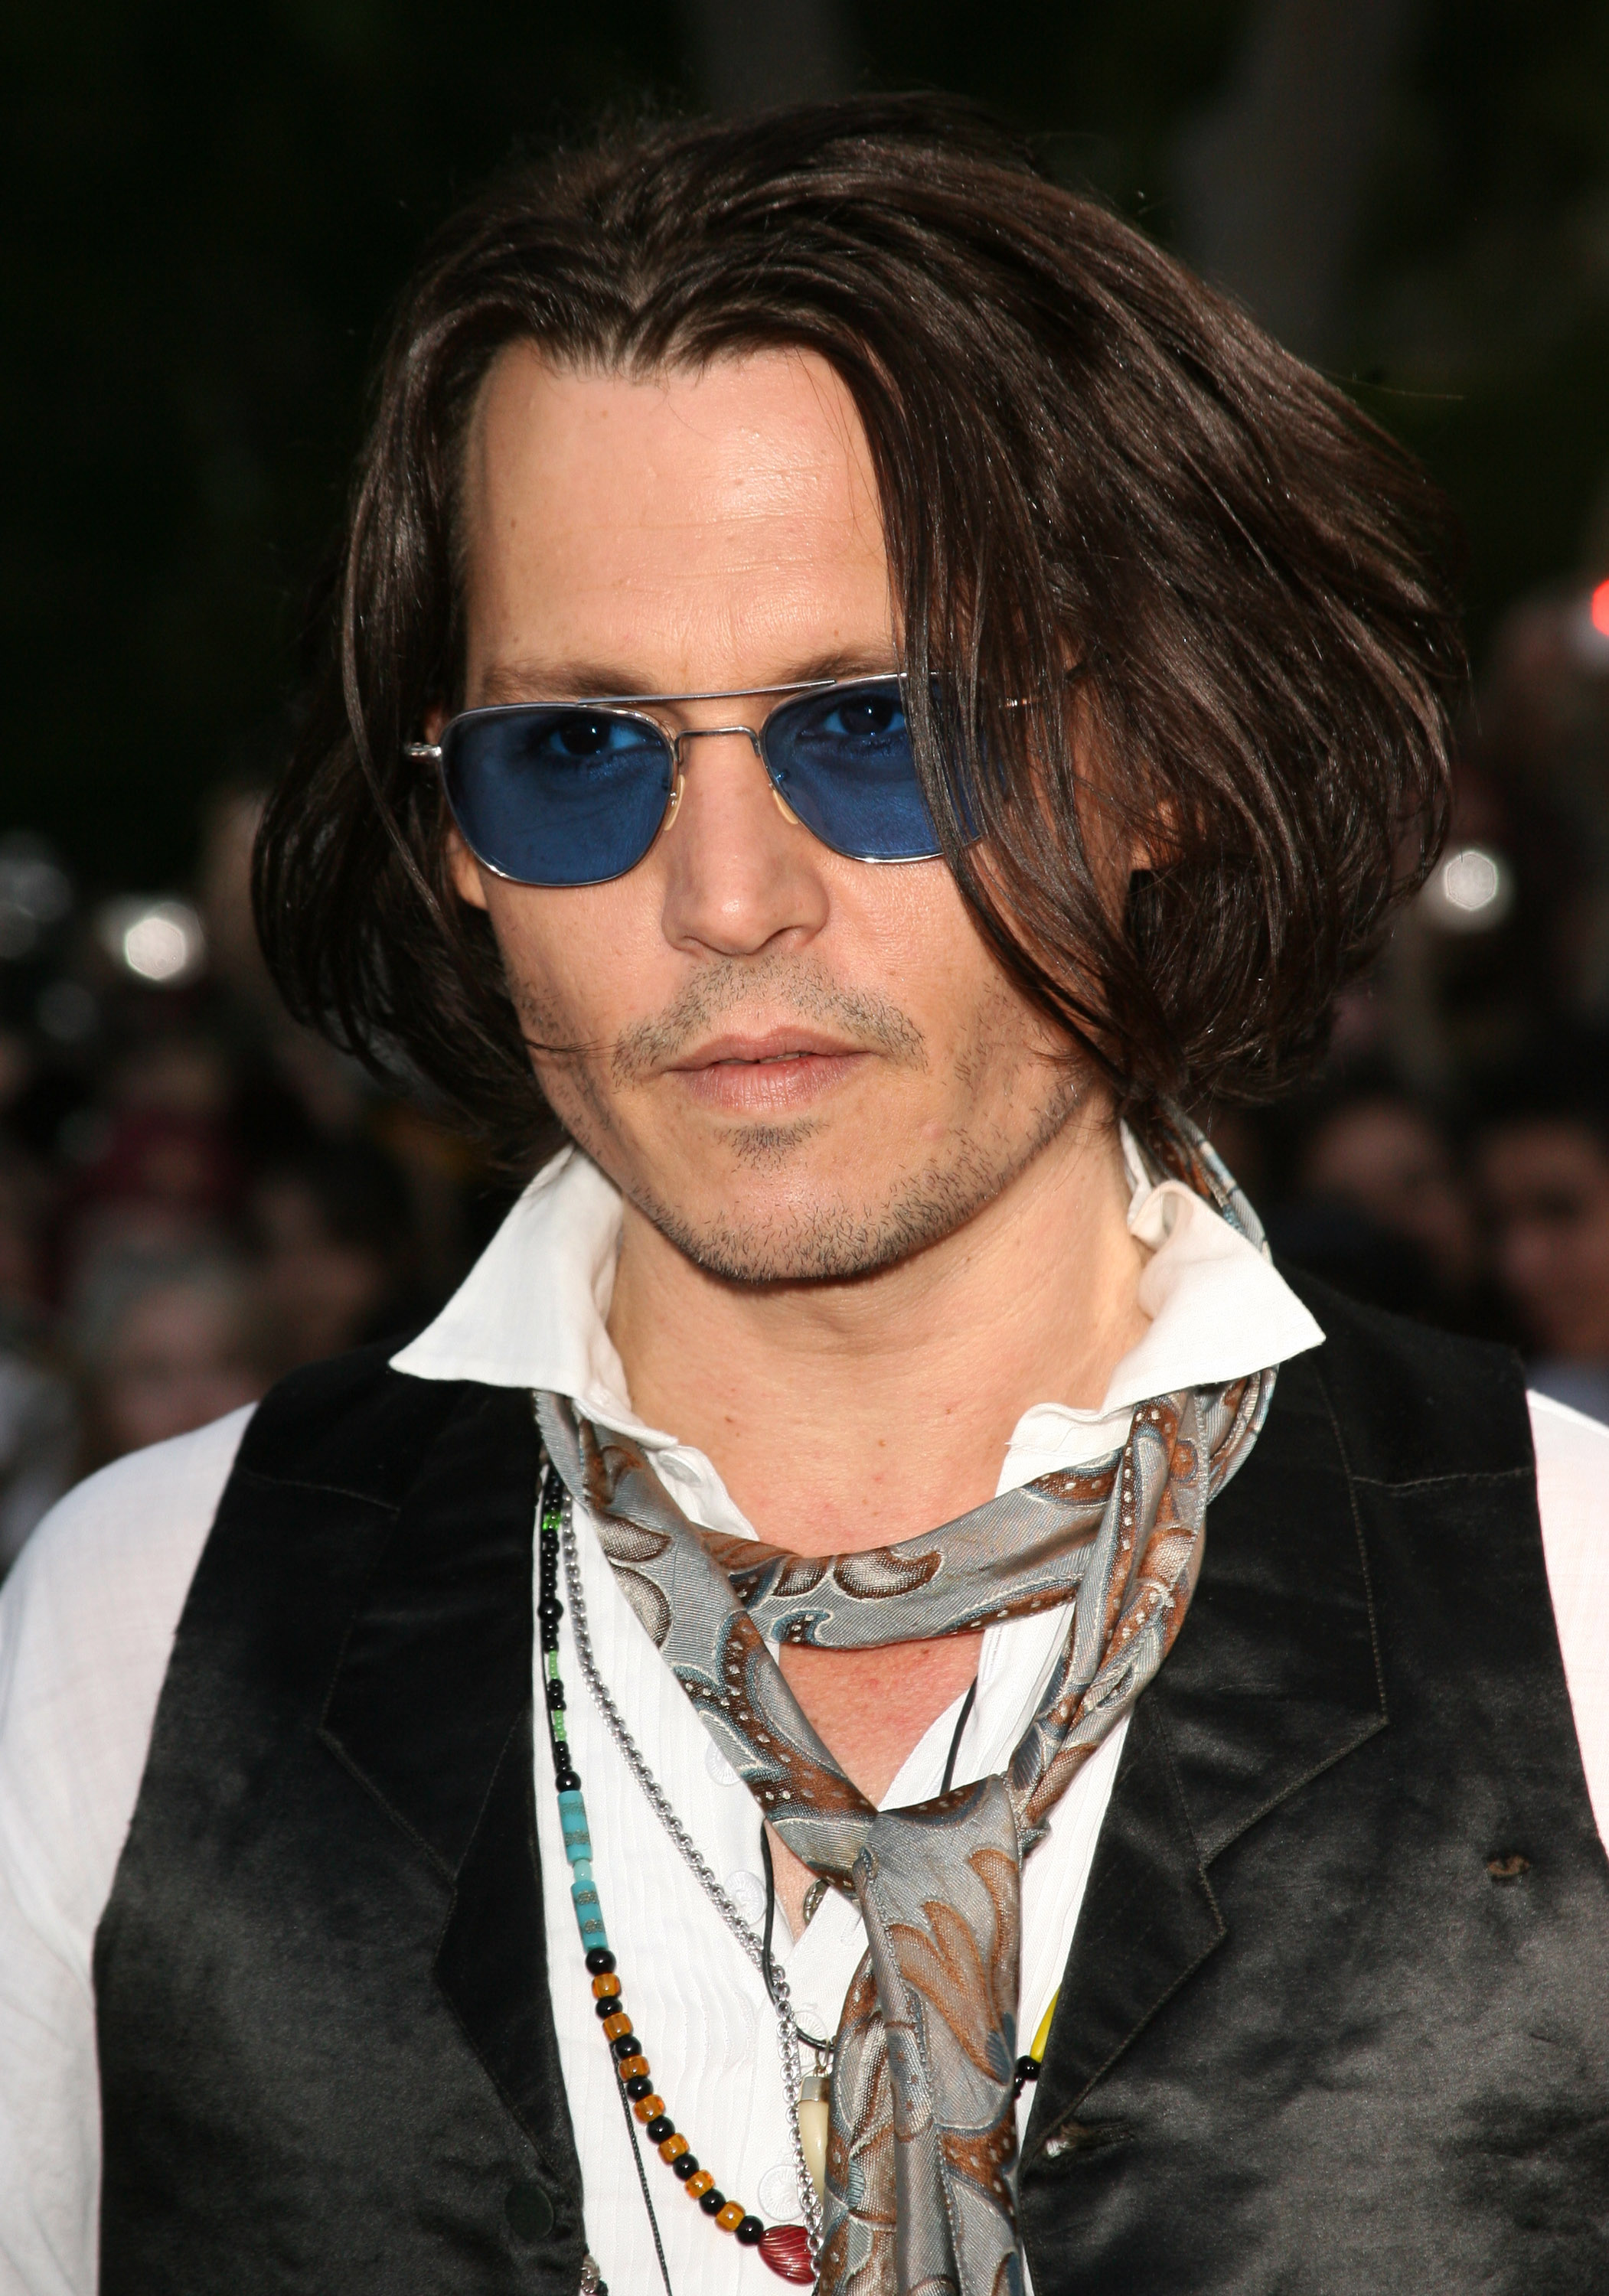 Johnny Depp at the world premiere of "Pirates of the Caribbean: At World's End" in Anaheim, California on May 19, 2007 | Source: Getty Images